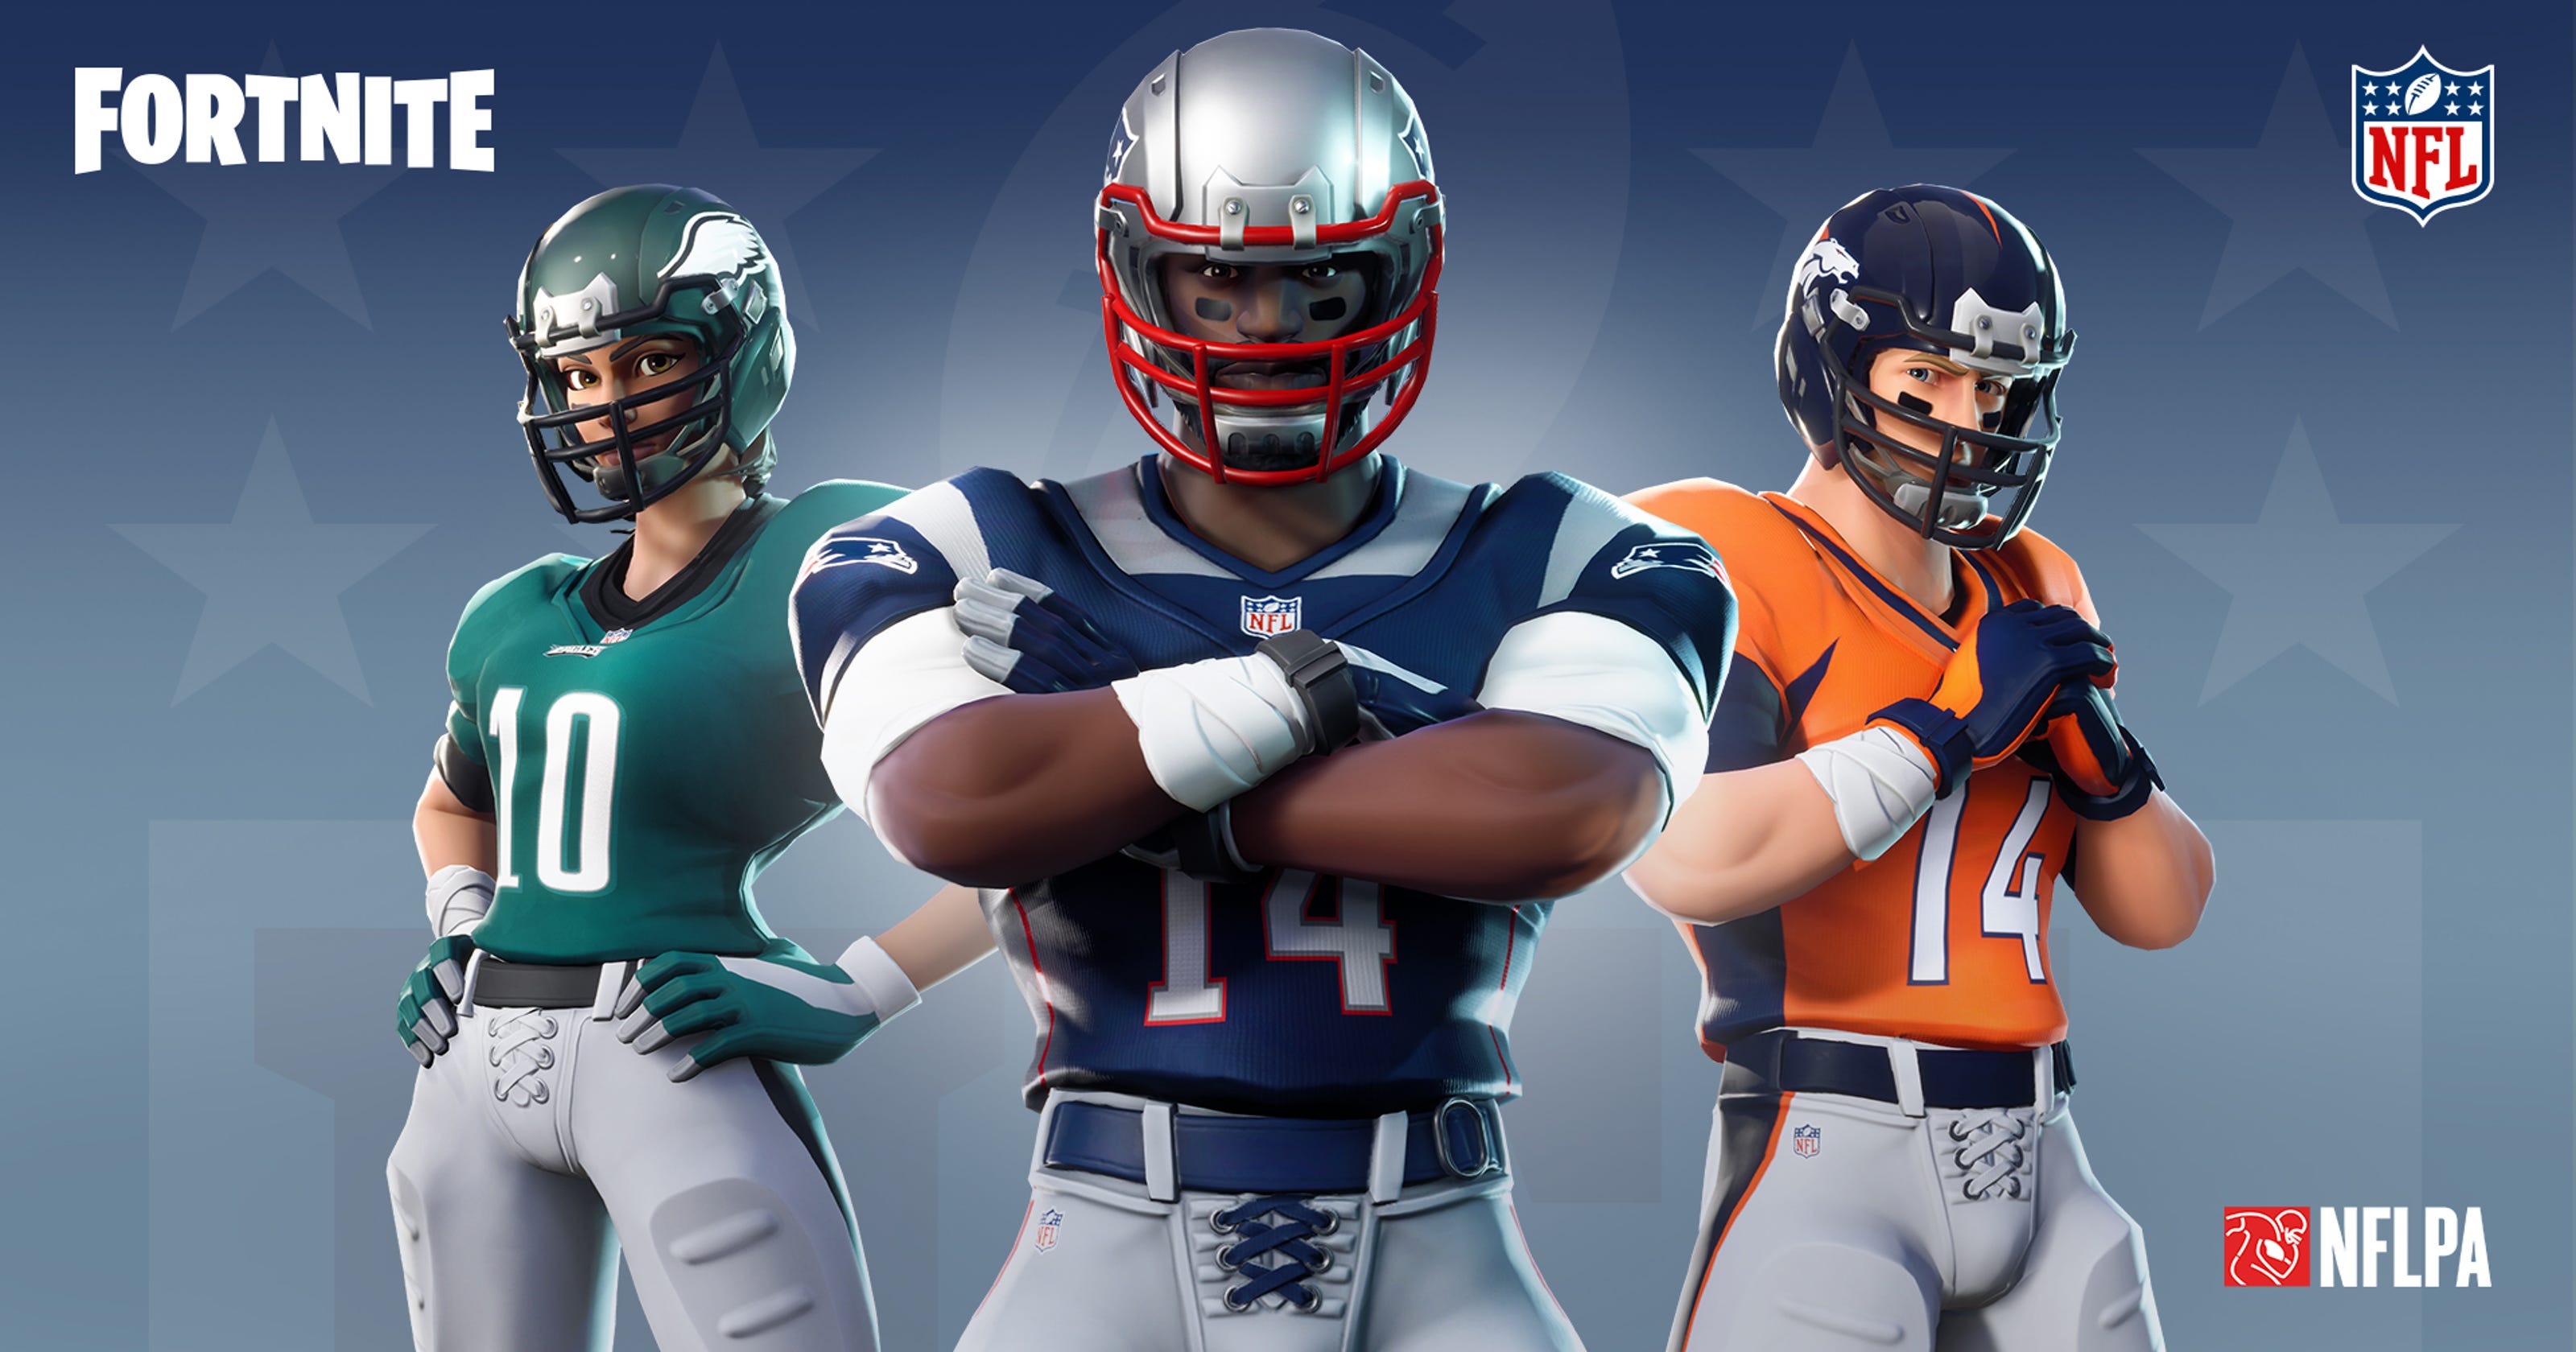 Fortnite Adds Nfl Uniforms And Other Football Gear - fortnite nfl team up to add skins and gear to the game starting friday